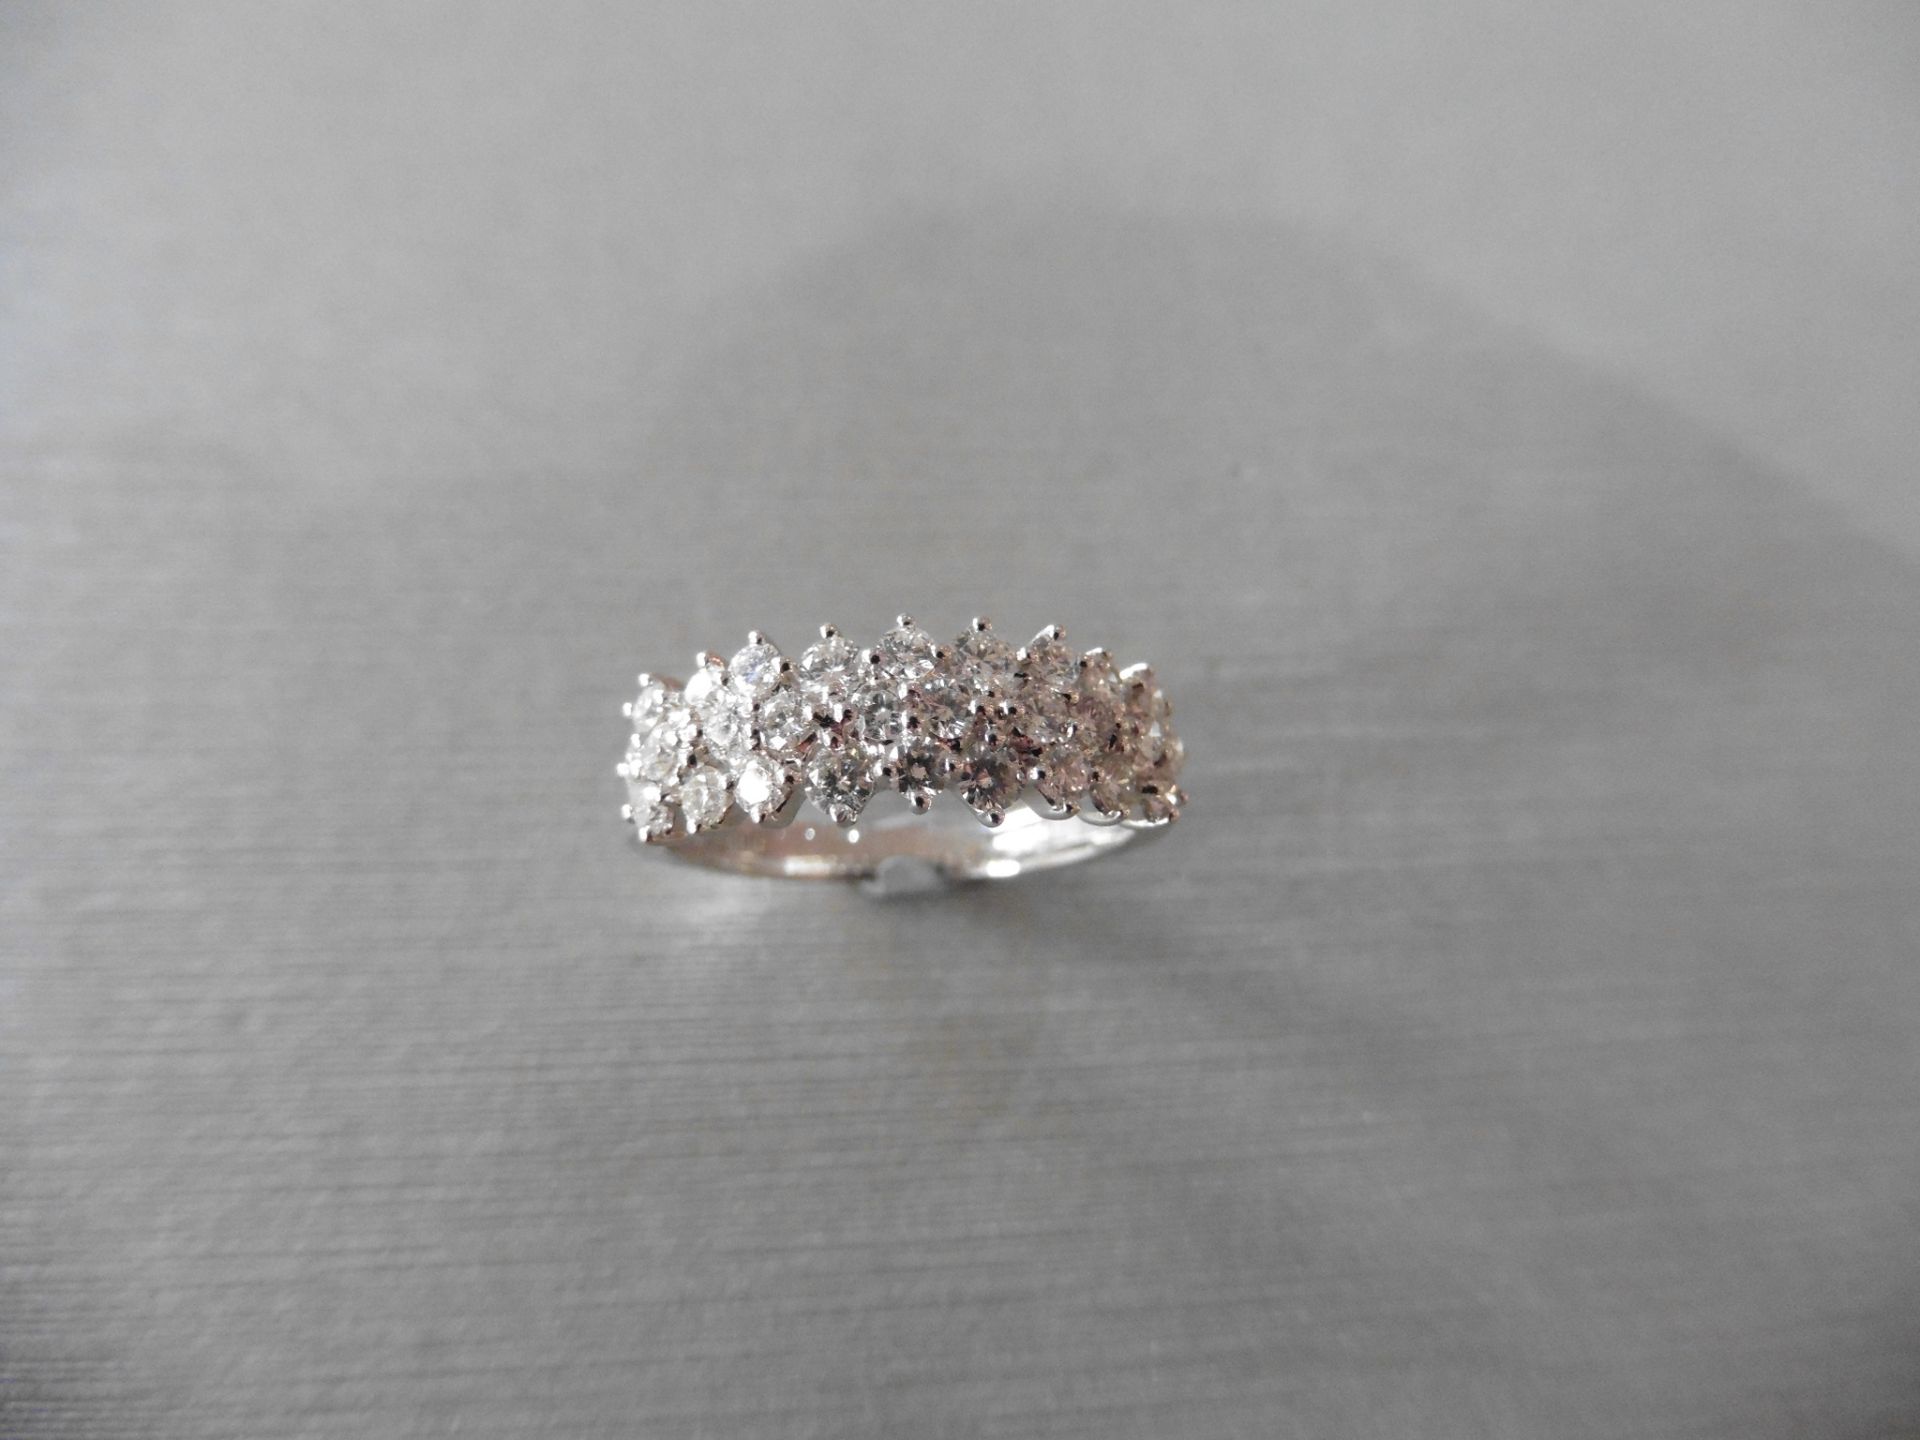 18ct white gold diamond band ring set with 3 rows of small brilliant cut diamonds, H colour and Si - Image 3 of 3